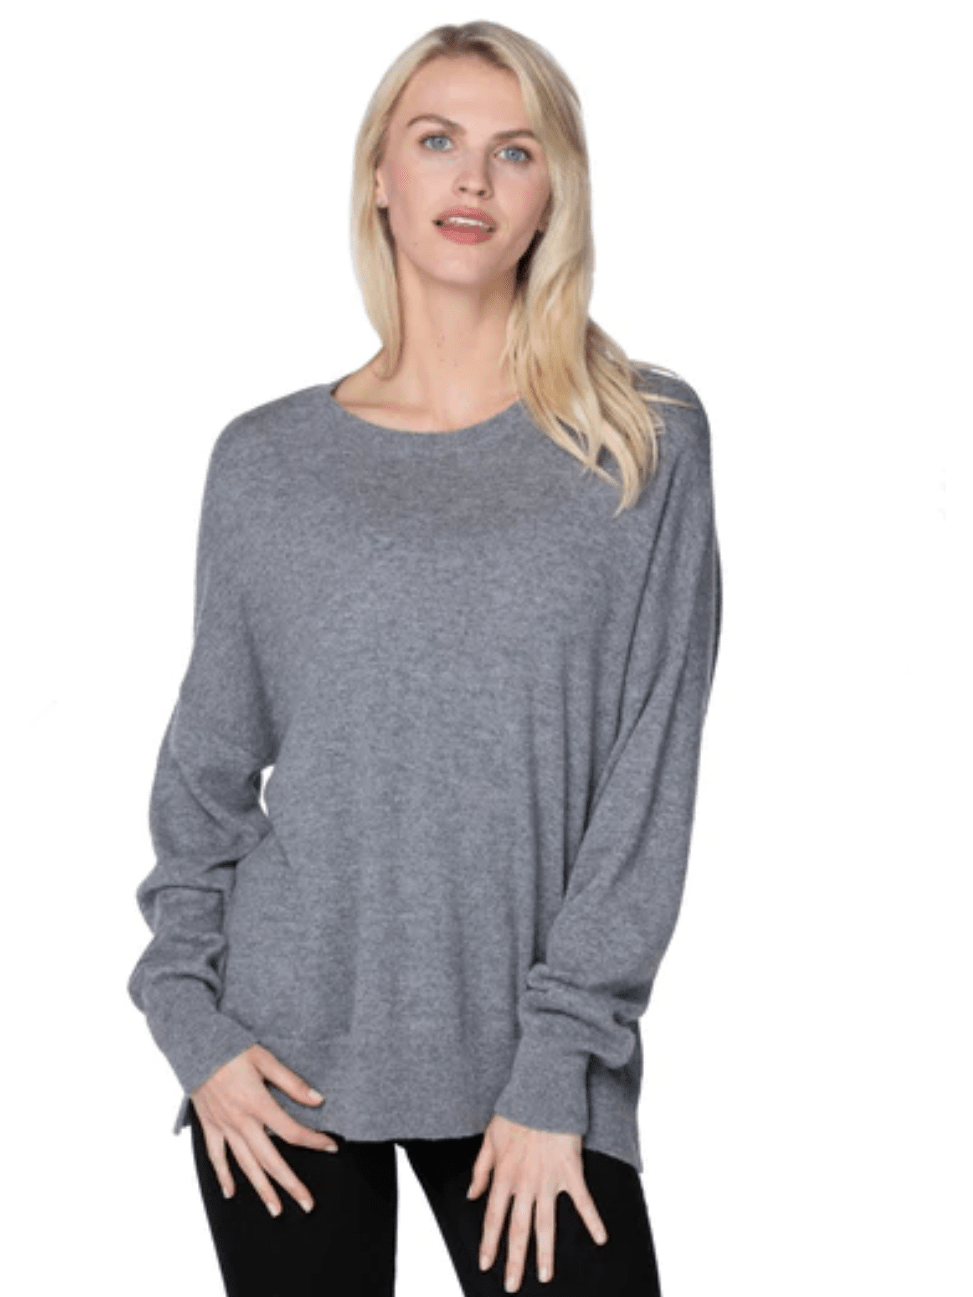 Washable Cashmere Crew Sweater Tops MOM fave 